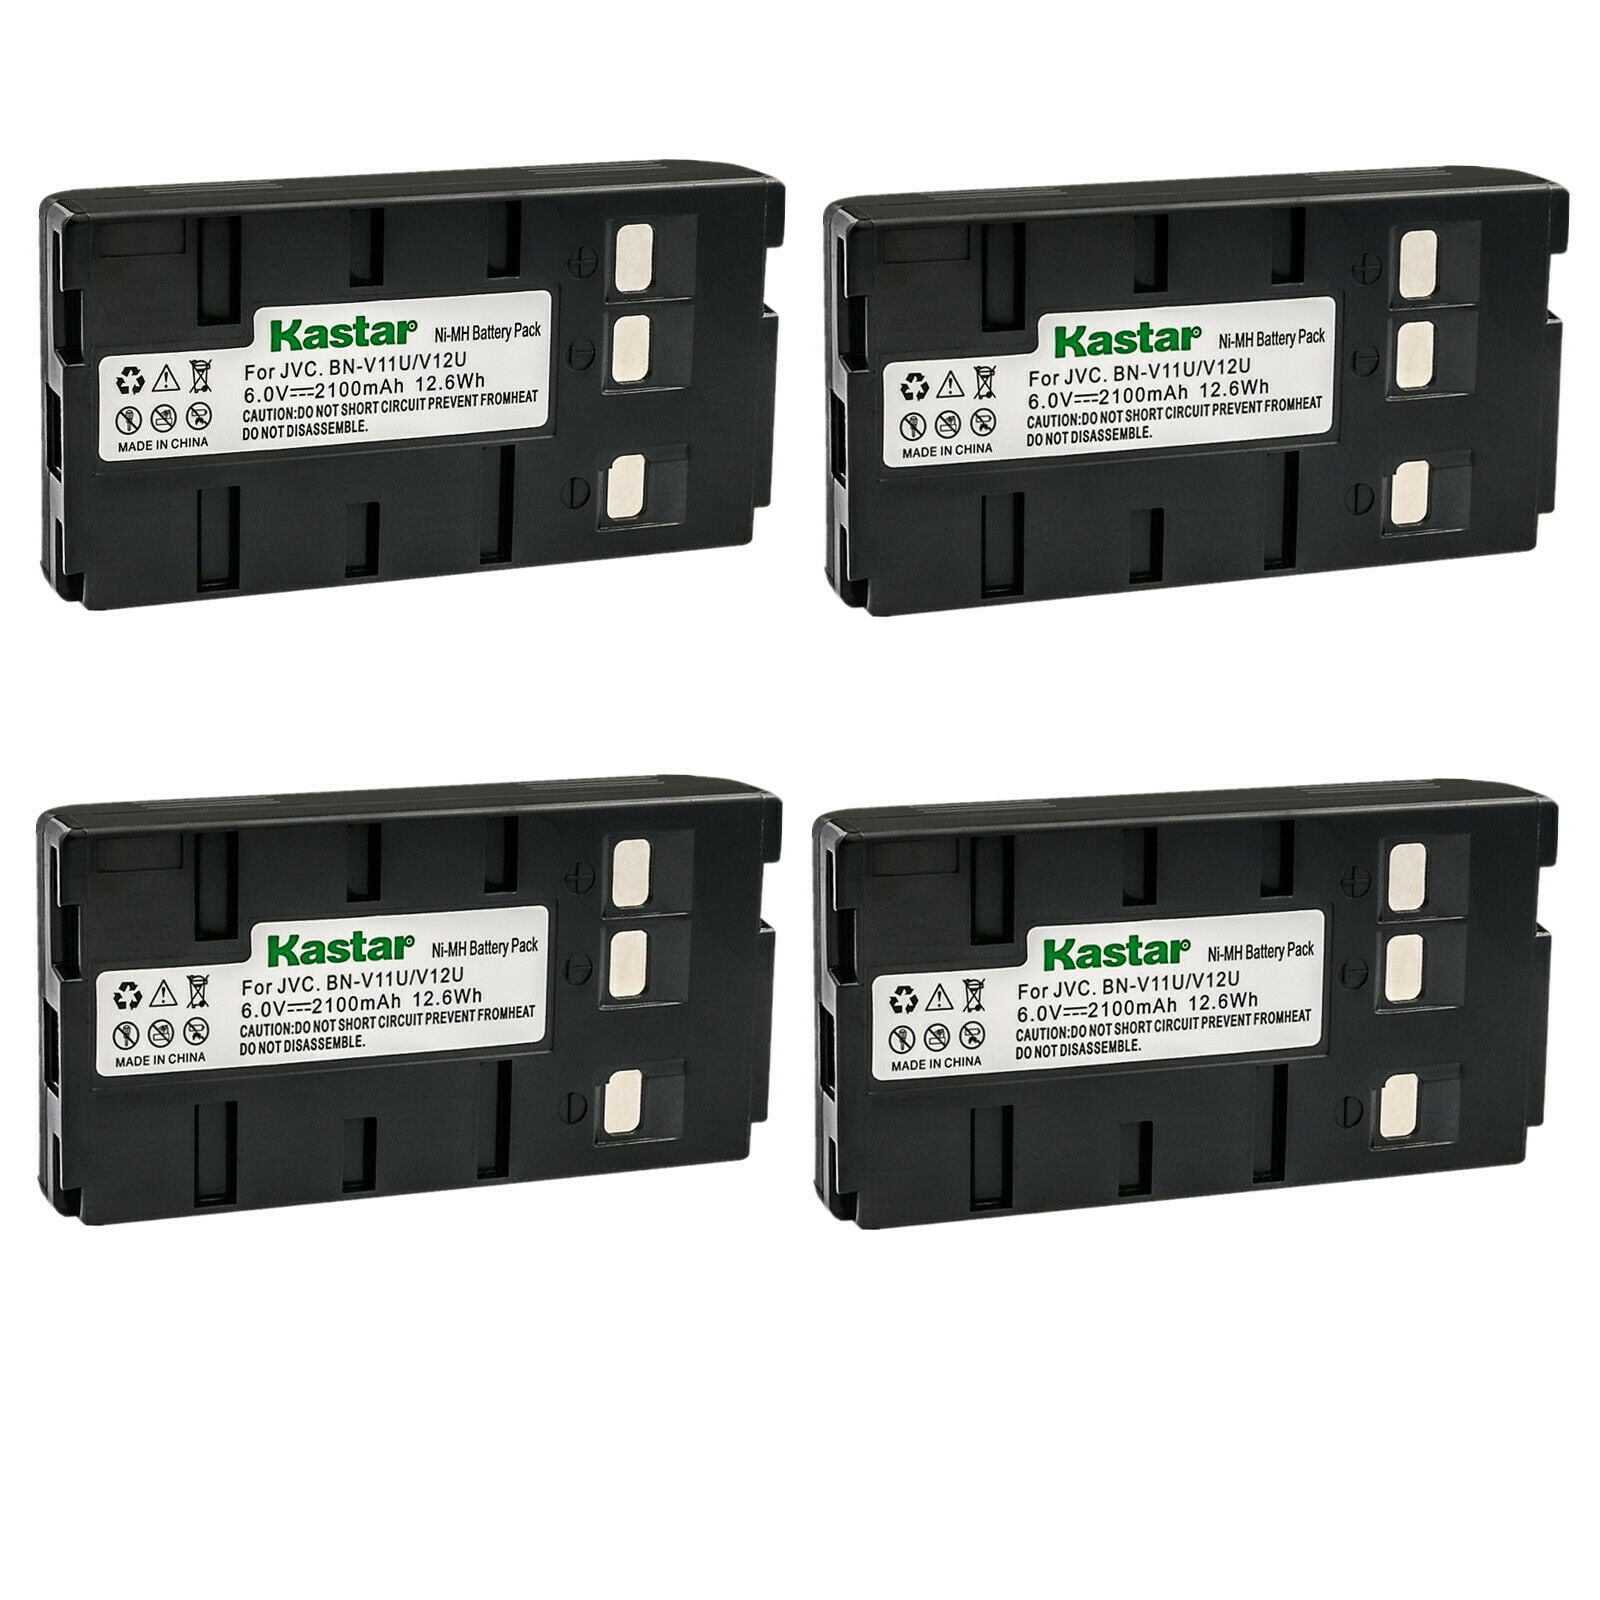 Kastar 1-Pack Battery and Smart USB Charger Replacement for Panasonic PV-IQ525 PV-L352 PV-L353 PV-L354 PV-L453 PV-L552 PV-L557 PV-L558 PV-L559 PV-L559D PV-L600 PV-L606 PV-L650 PV-L657 PV-L659 PV-L757 